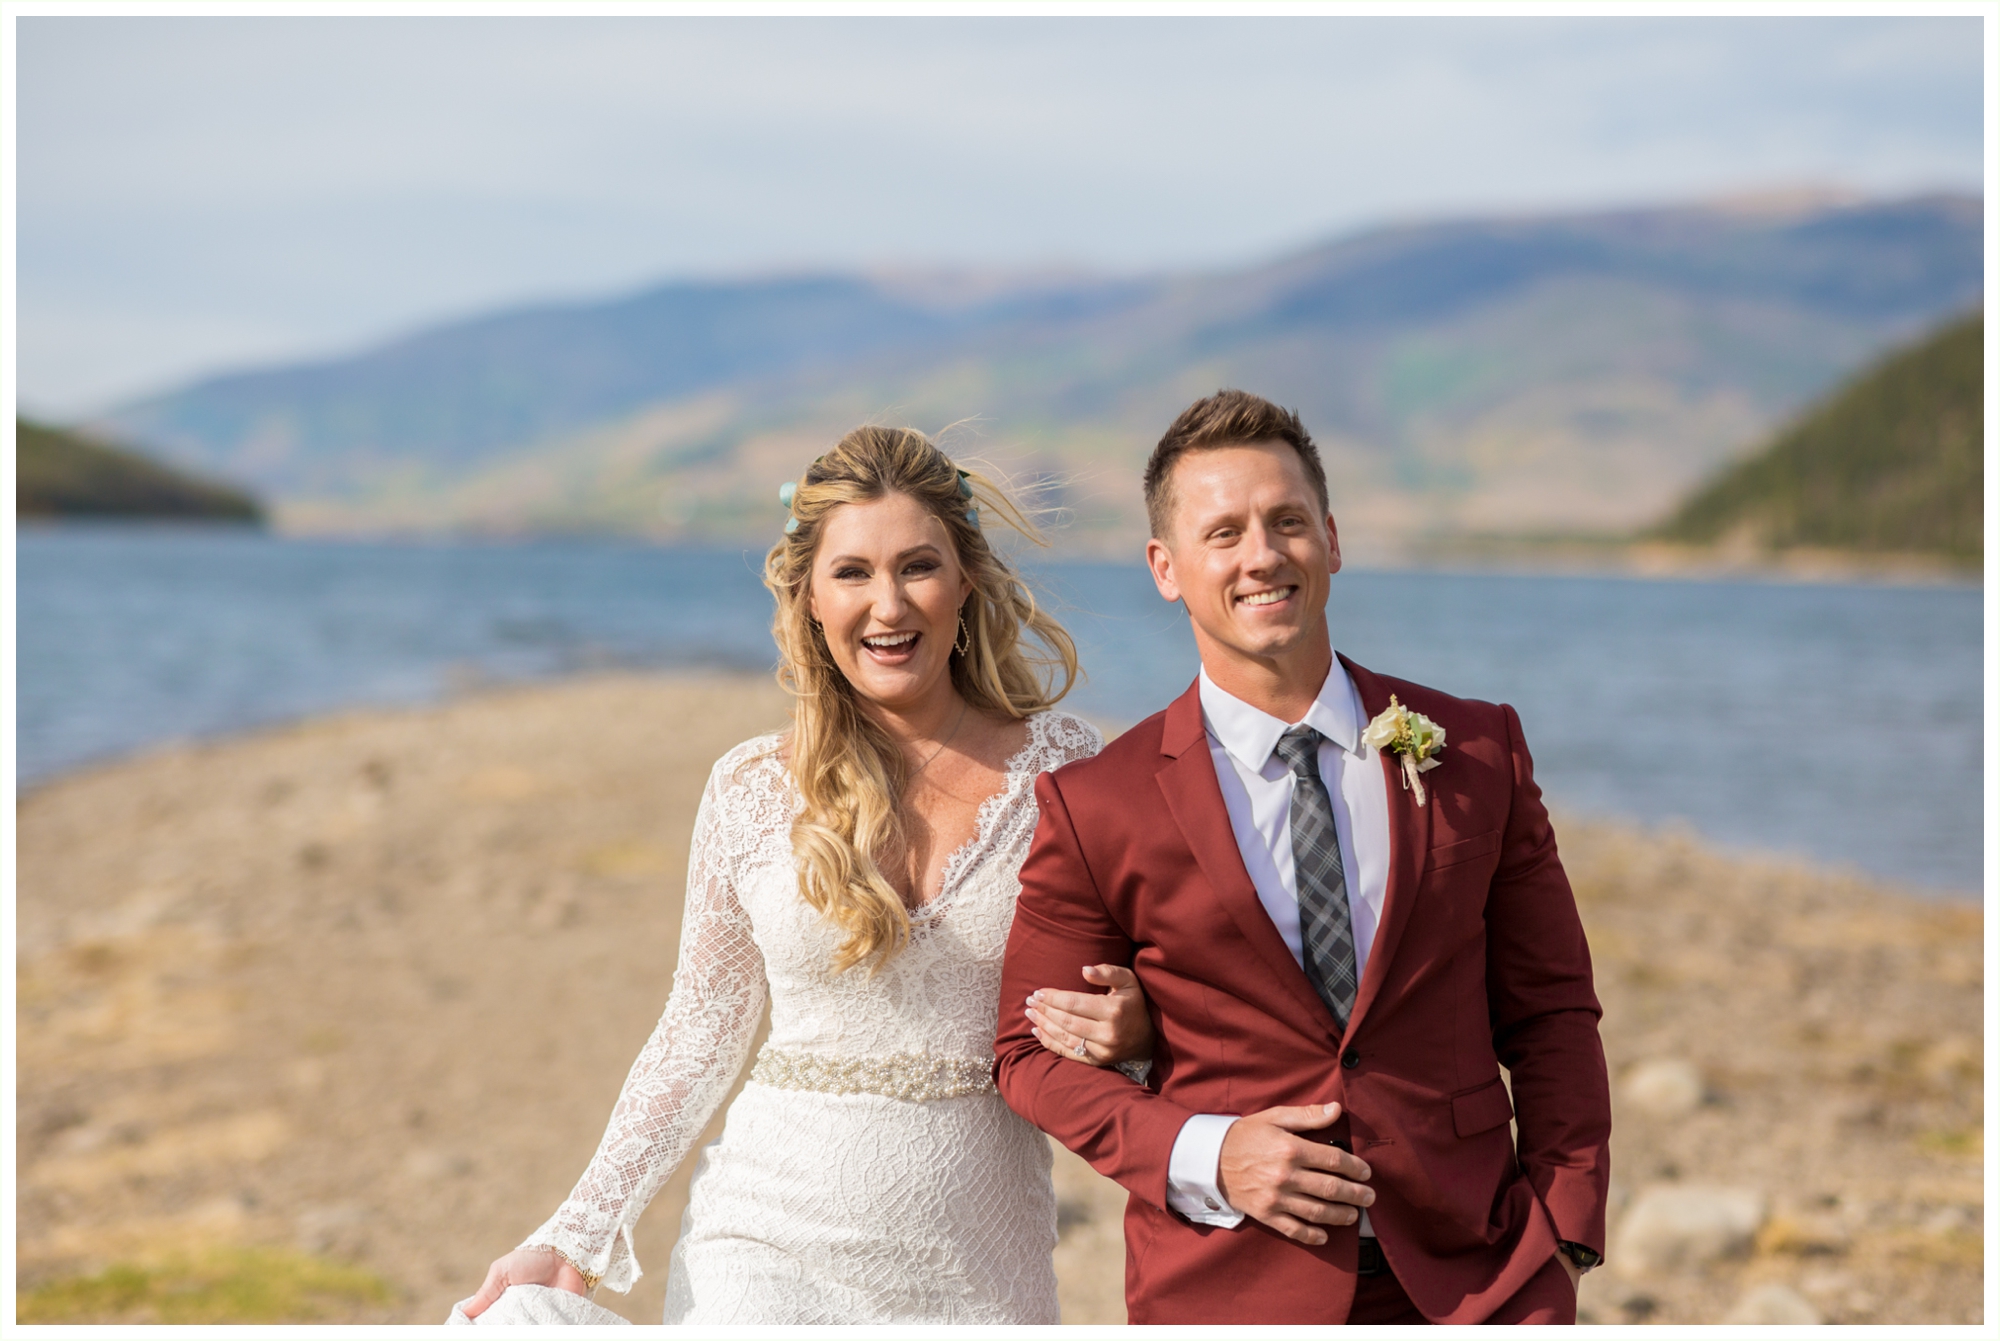 bride and groom photos at lake dillon before sapphire point elopement groom wears maroon suit bride has long sleeved dress walking candid photos